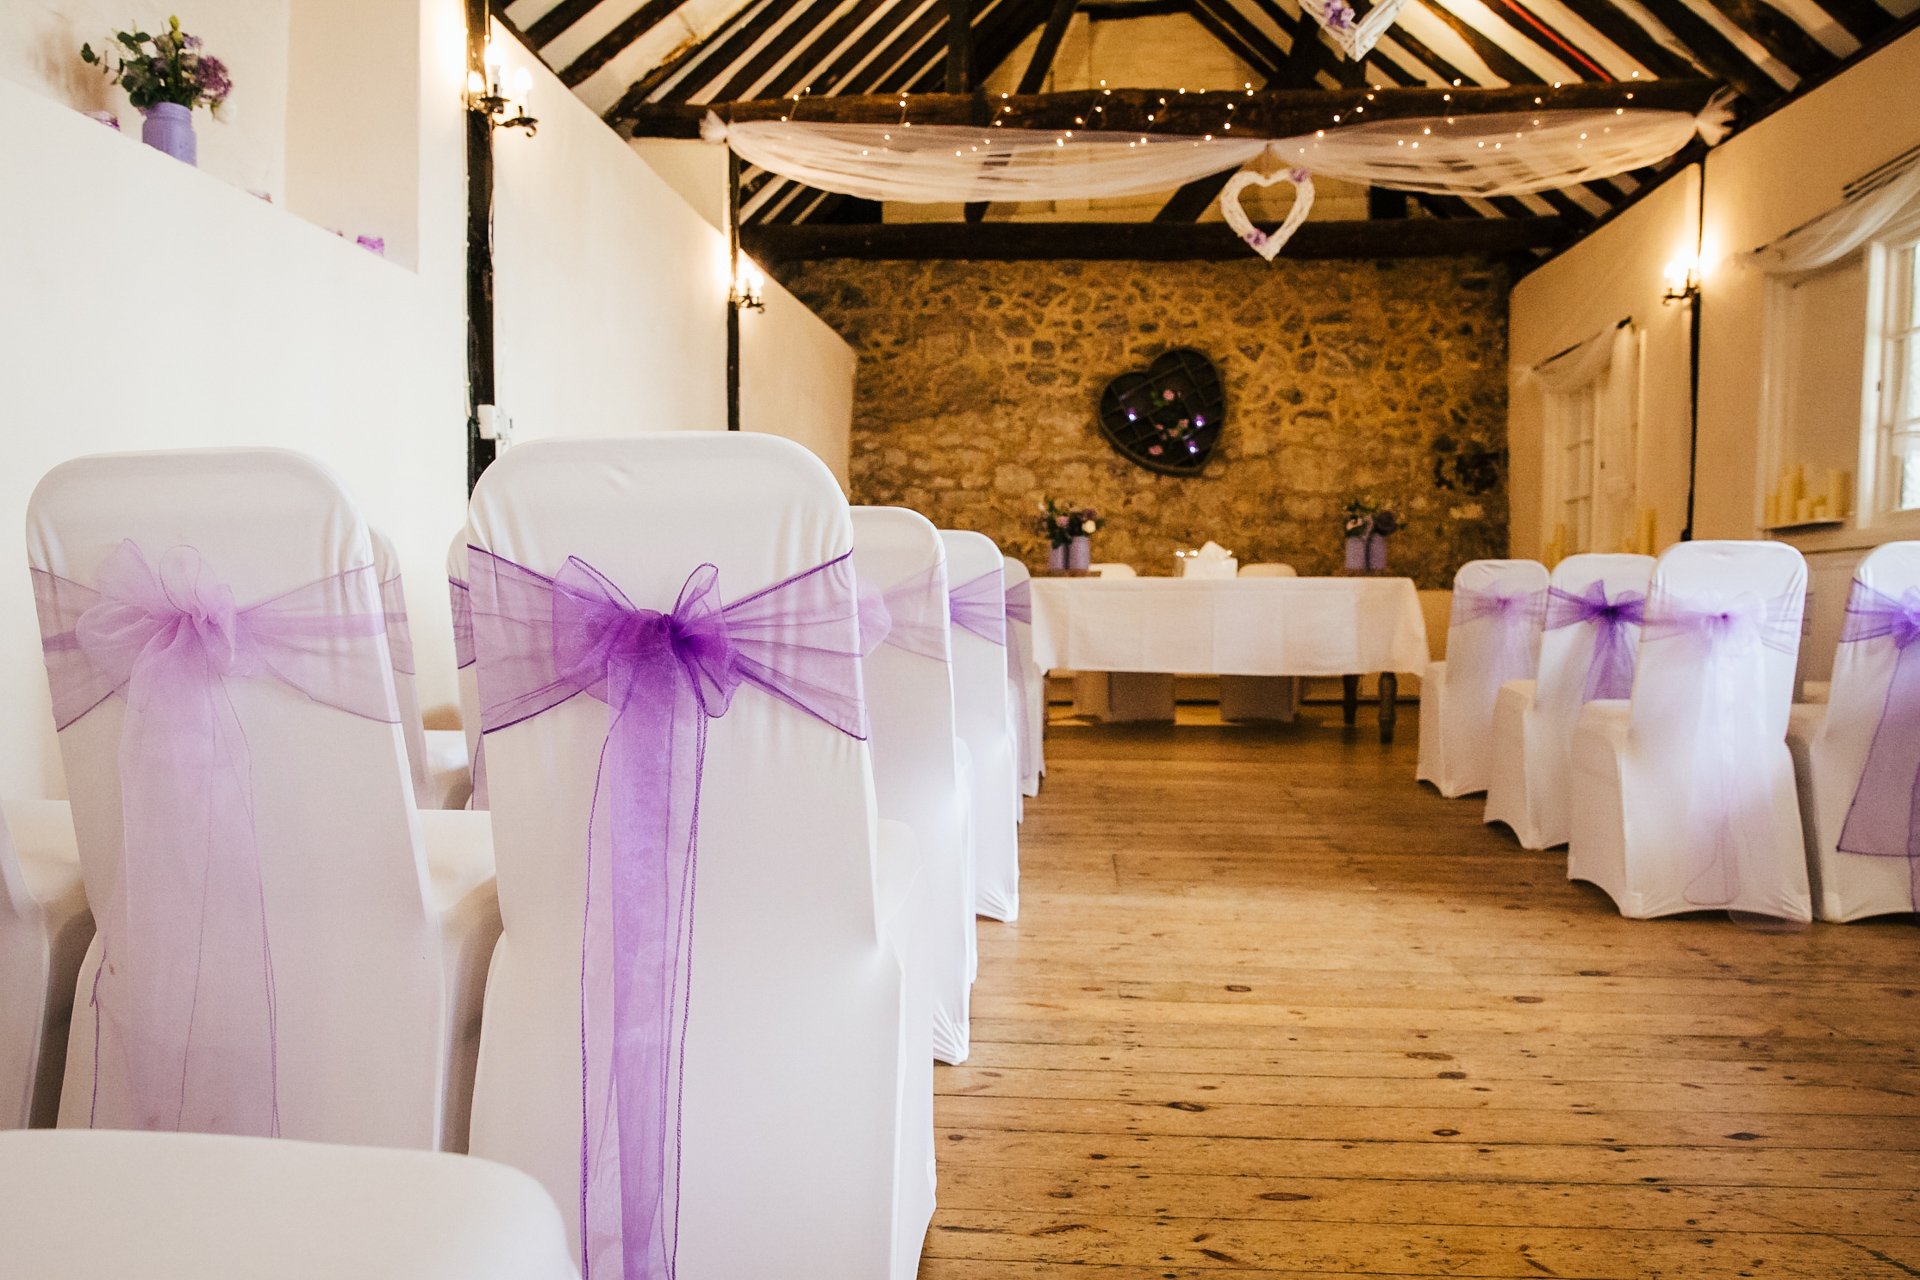 Stunning Wedding set up at The Buttery, ceremony room at The Bull Hotel, Wrotham, Kent